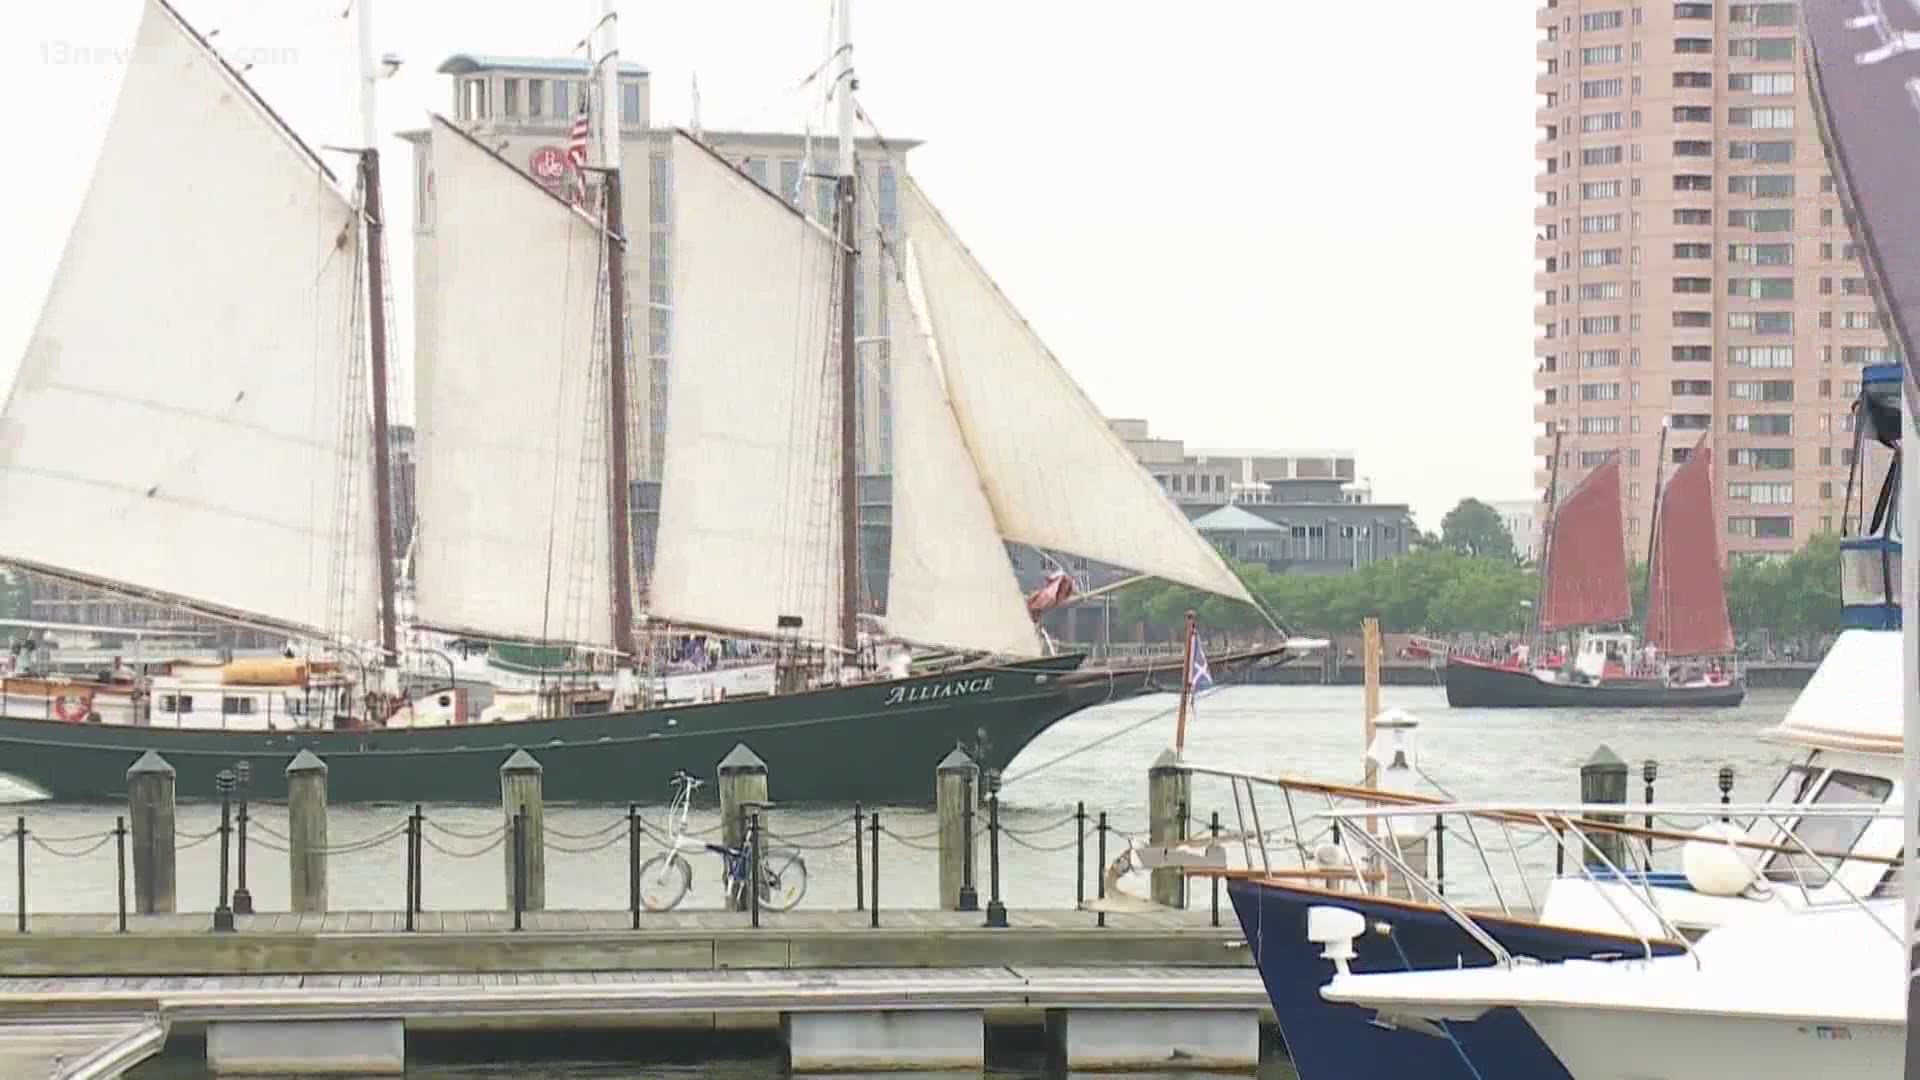 Norfolk tall ships set sail once again in age of COVID19